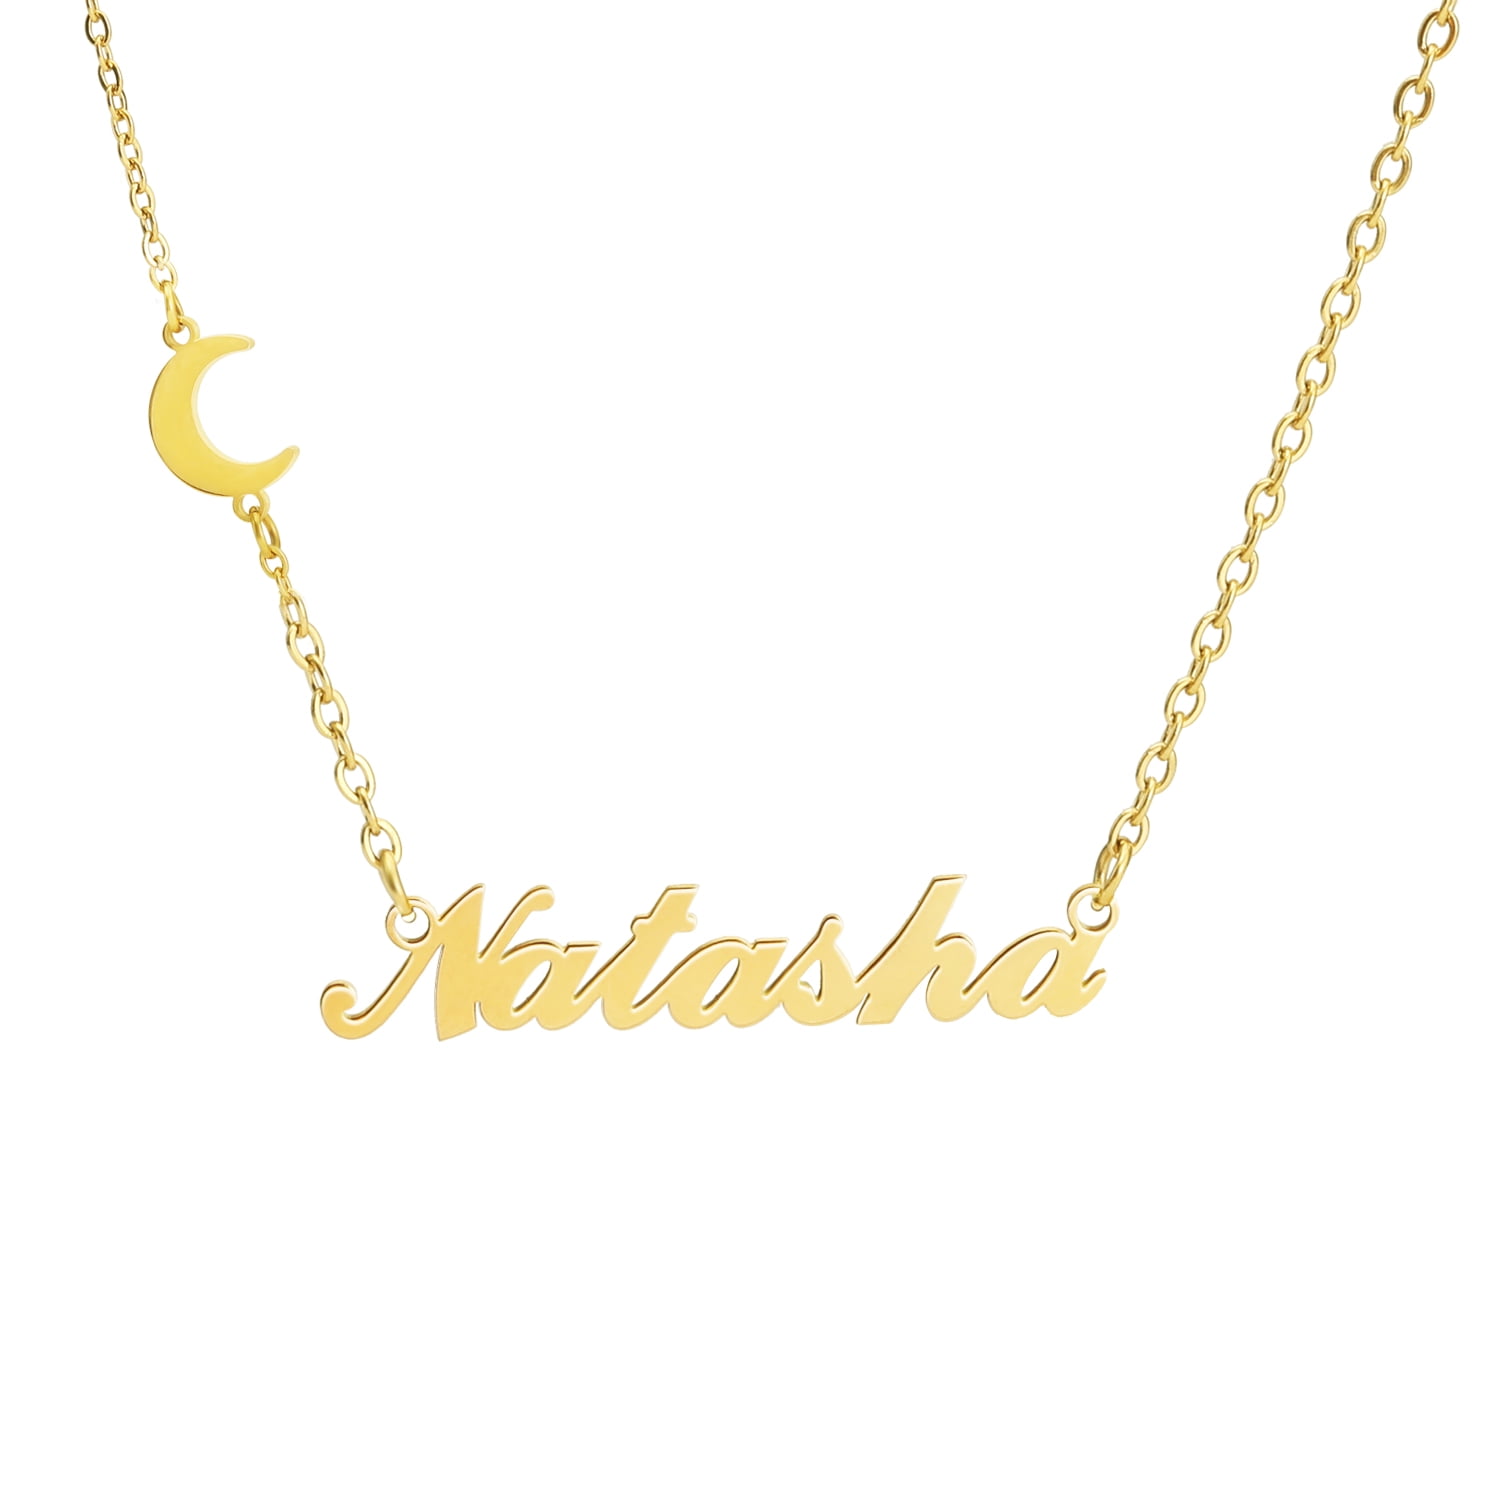 Personalized Name Necklace 18k Gold Plated Name plate Custom Pendant & Chain A